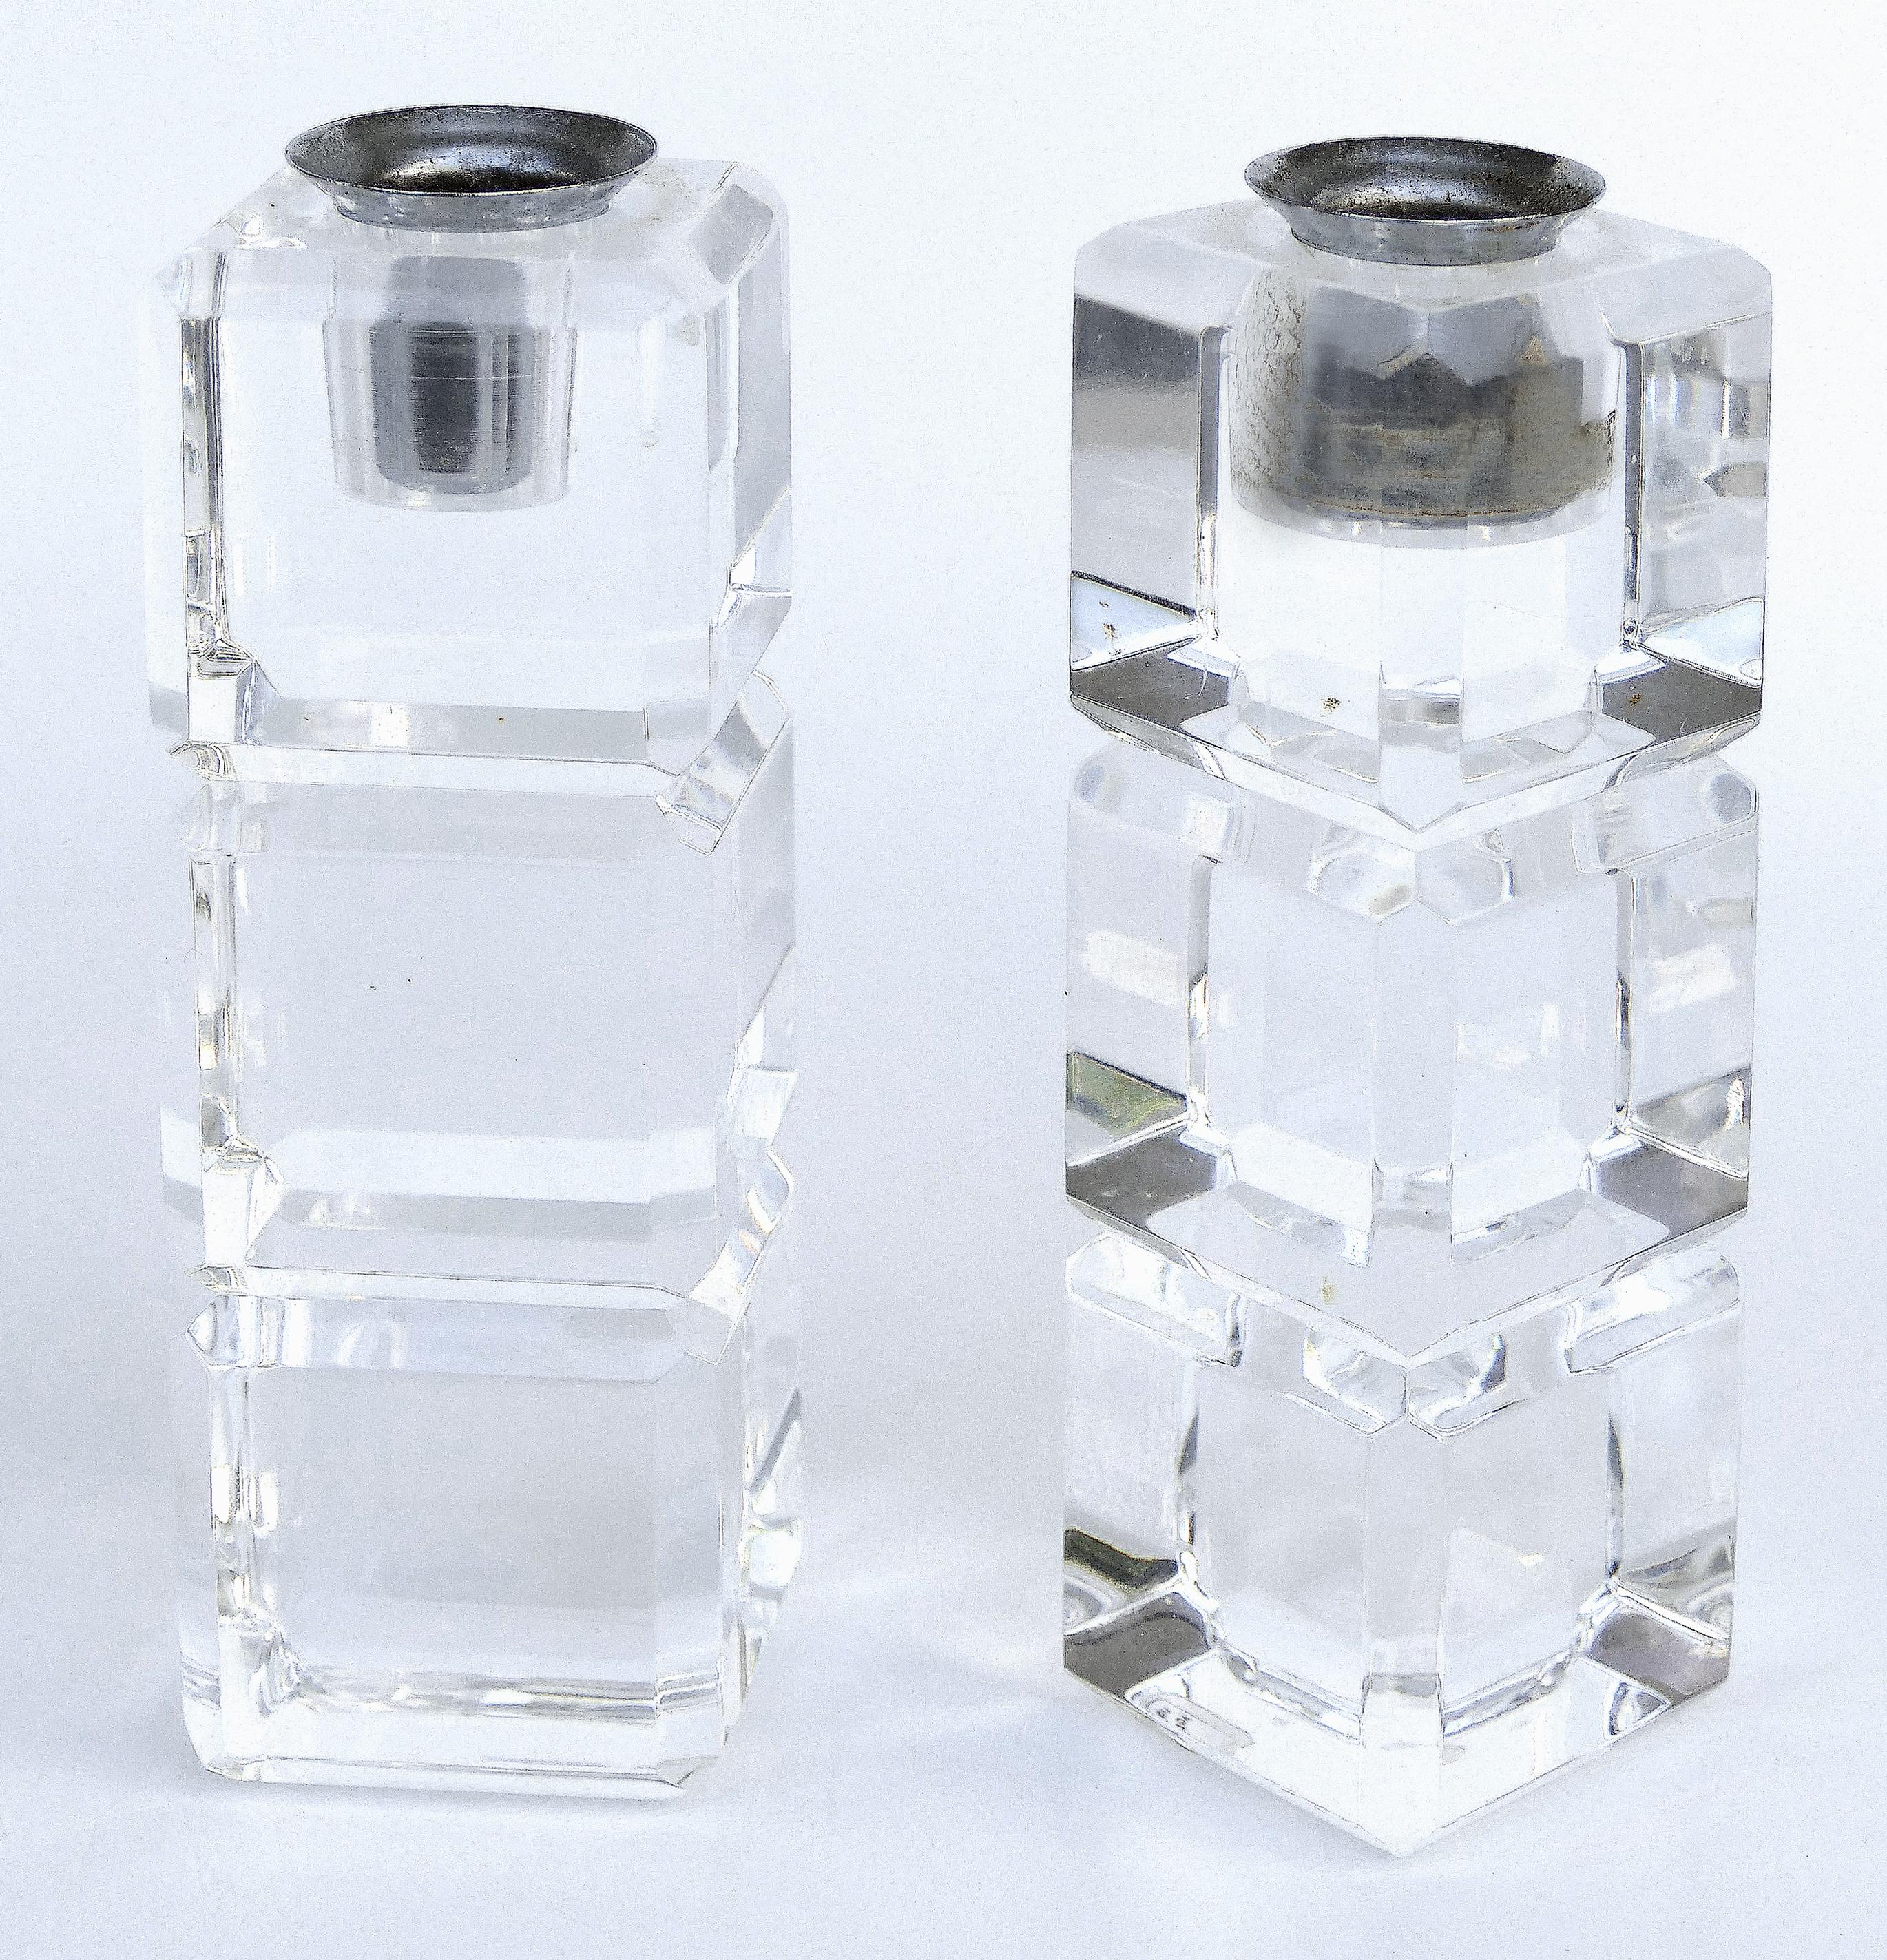 Vintage Peter Alan designs Lucite candle holders, a pair

Offered for sale is a vintage pair of carved and faceted Lucite candle holders manufactured by Peter Alan designs.